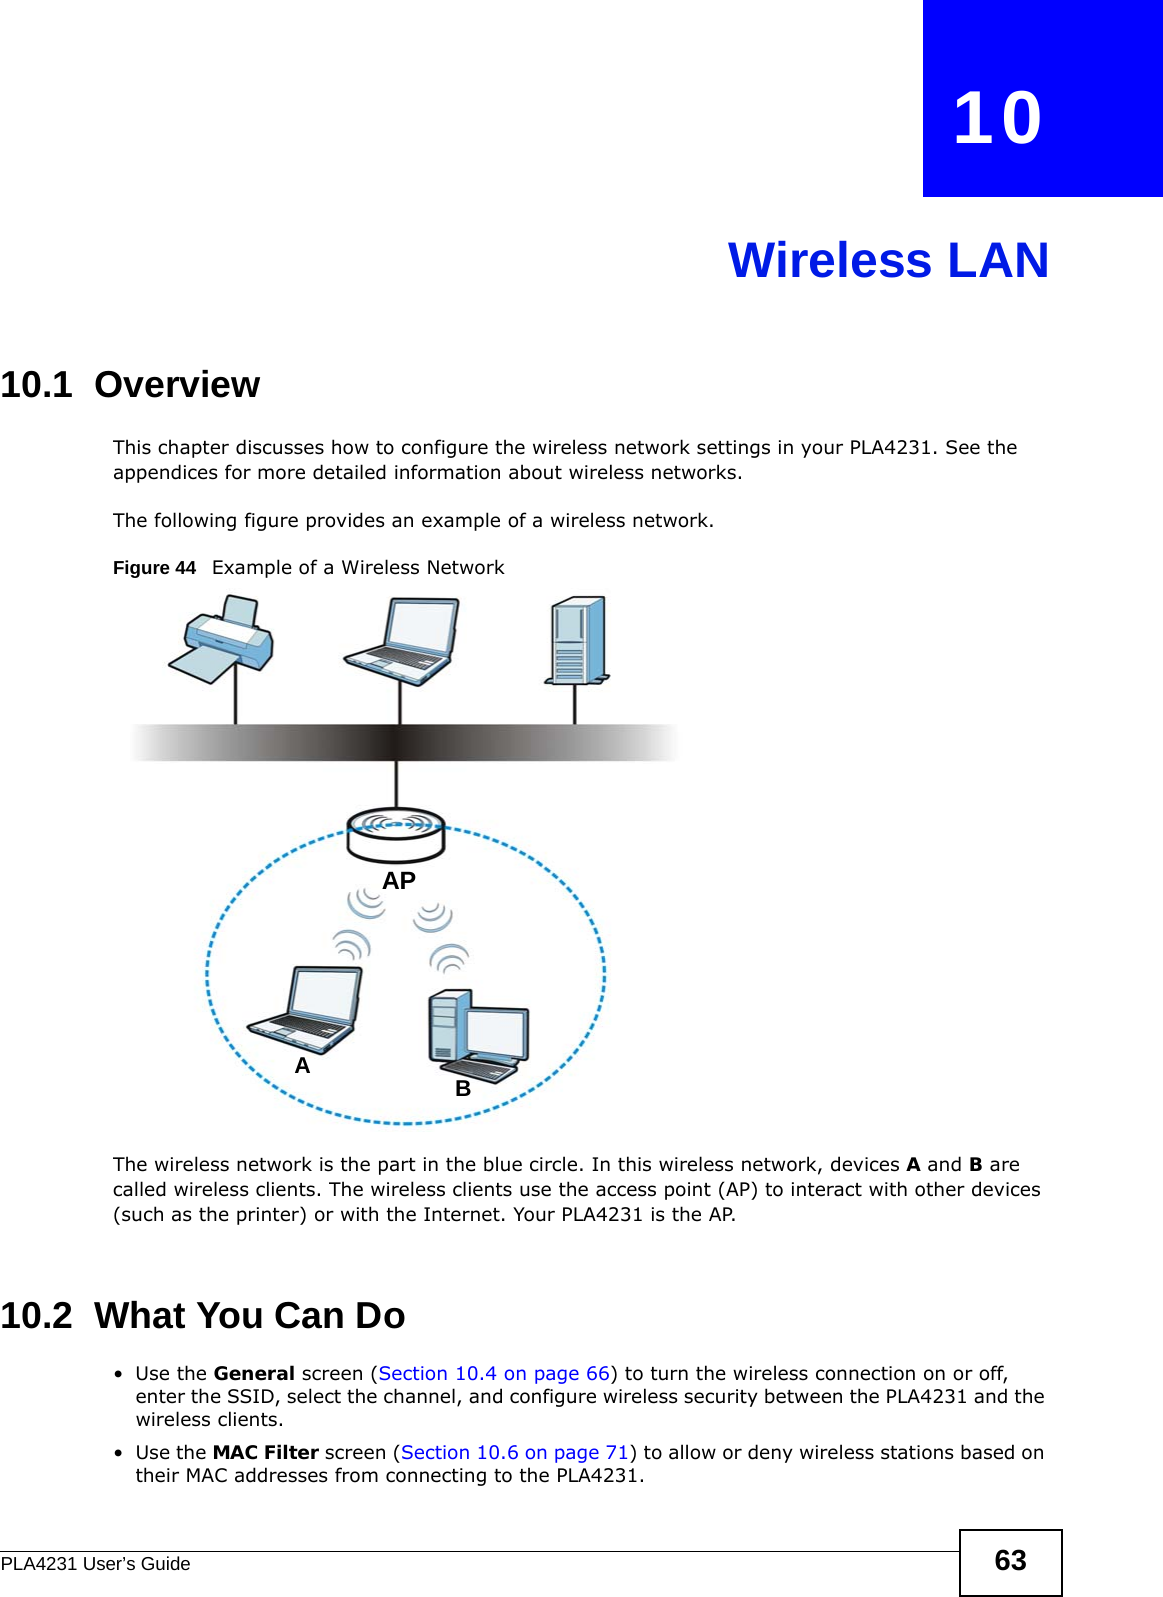 PLA4231 User’s Guide 63CHAPTER   10Wireless LAN10.1  OverviewThis chapter discusses how to configure the wireless network settings in your PLA4231. See the appendices for more detailed information about wireless networks.The following figure provides an example of a wireless network.Figure 44   Example of a Wireless NetworkThe wireless network is the part in the blue circle. In this wireless network, devices A and B are called wireless clients. The wireless clients use the access point (AP) to interact with other devices (such as the printer) or with the Internet. Your PLA4231 is the AP.10.2  What You Can Do•Use the General screen (Section 10.4 on page 66) to turn the wireless connection on or off, enter the SSID, select the channel, and configure wireless security between the PLA4231 and the wireless clients.•Use the MAC Filter screen (Section 10.6 on page 71) to allow or deny wireless stations based on their MAC addresses from connecting to the PLA4231.ABAP